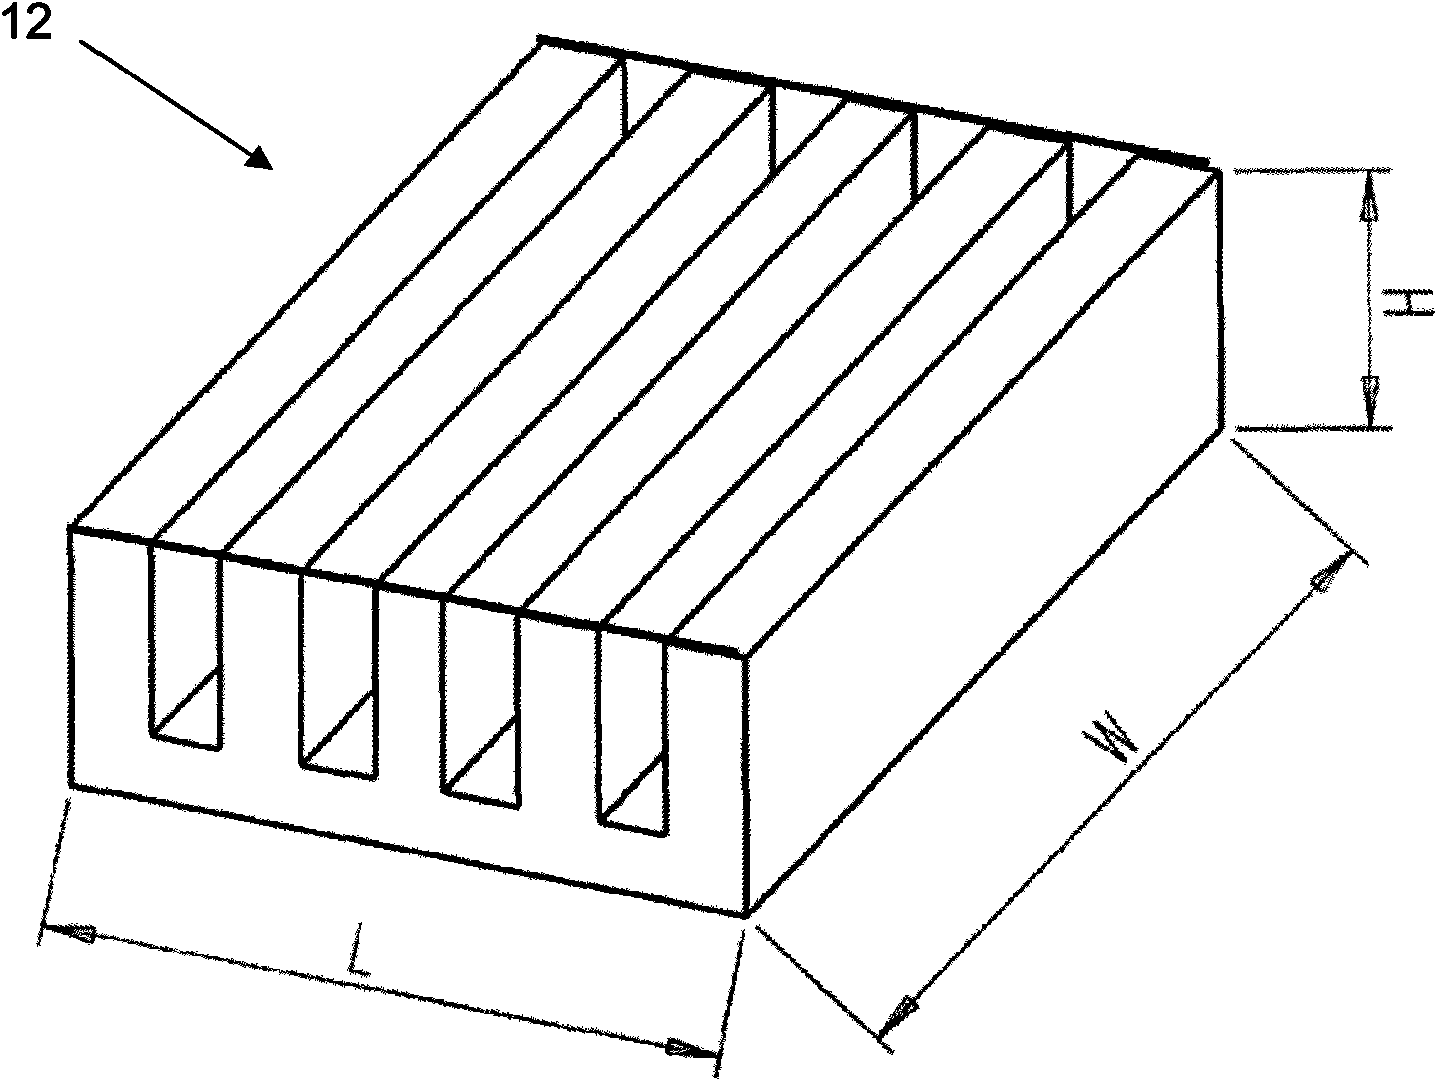 Heat dissipation system of heating modules